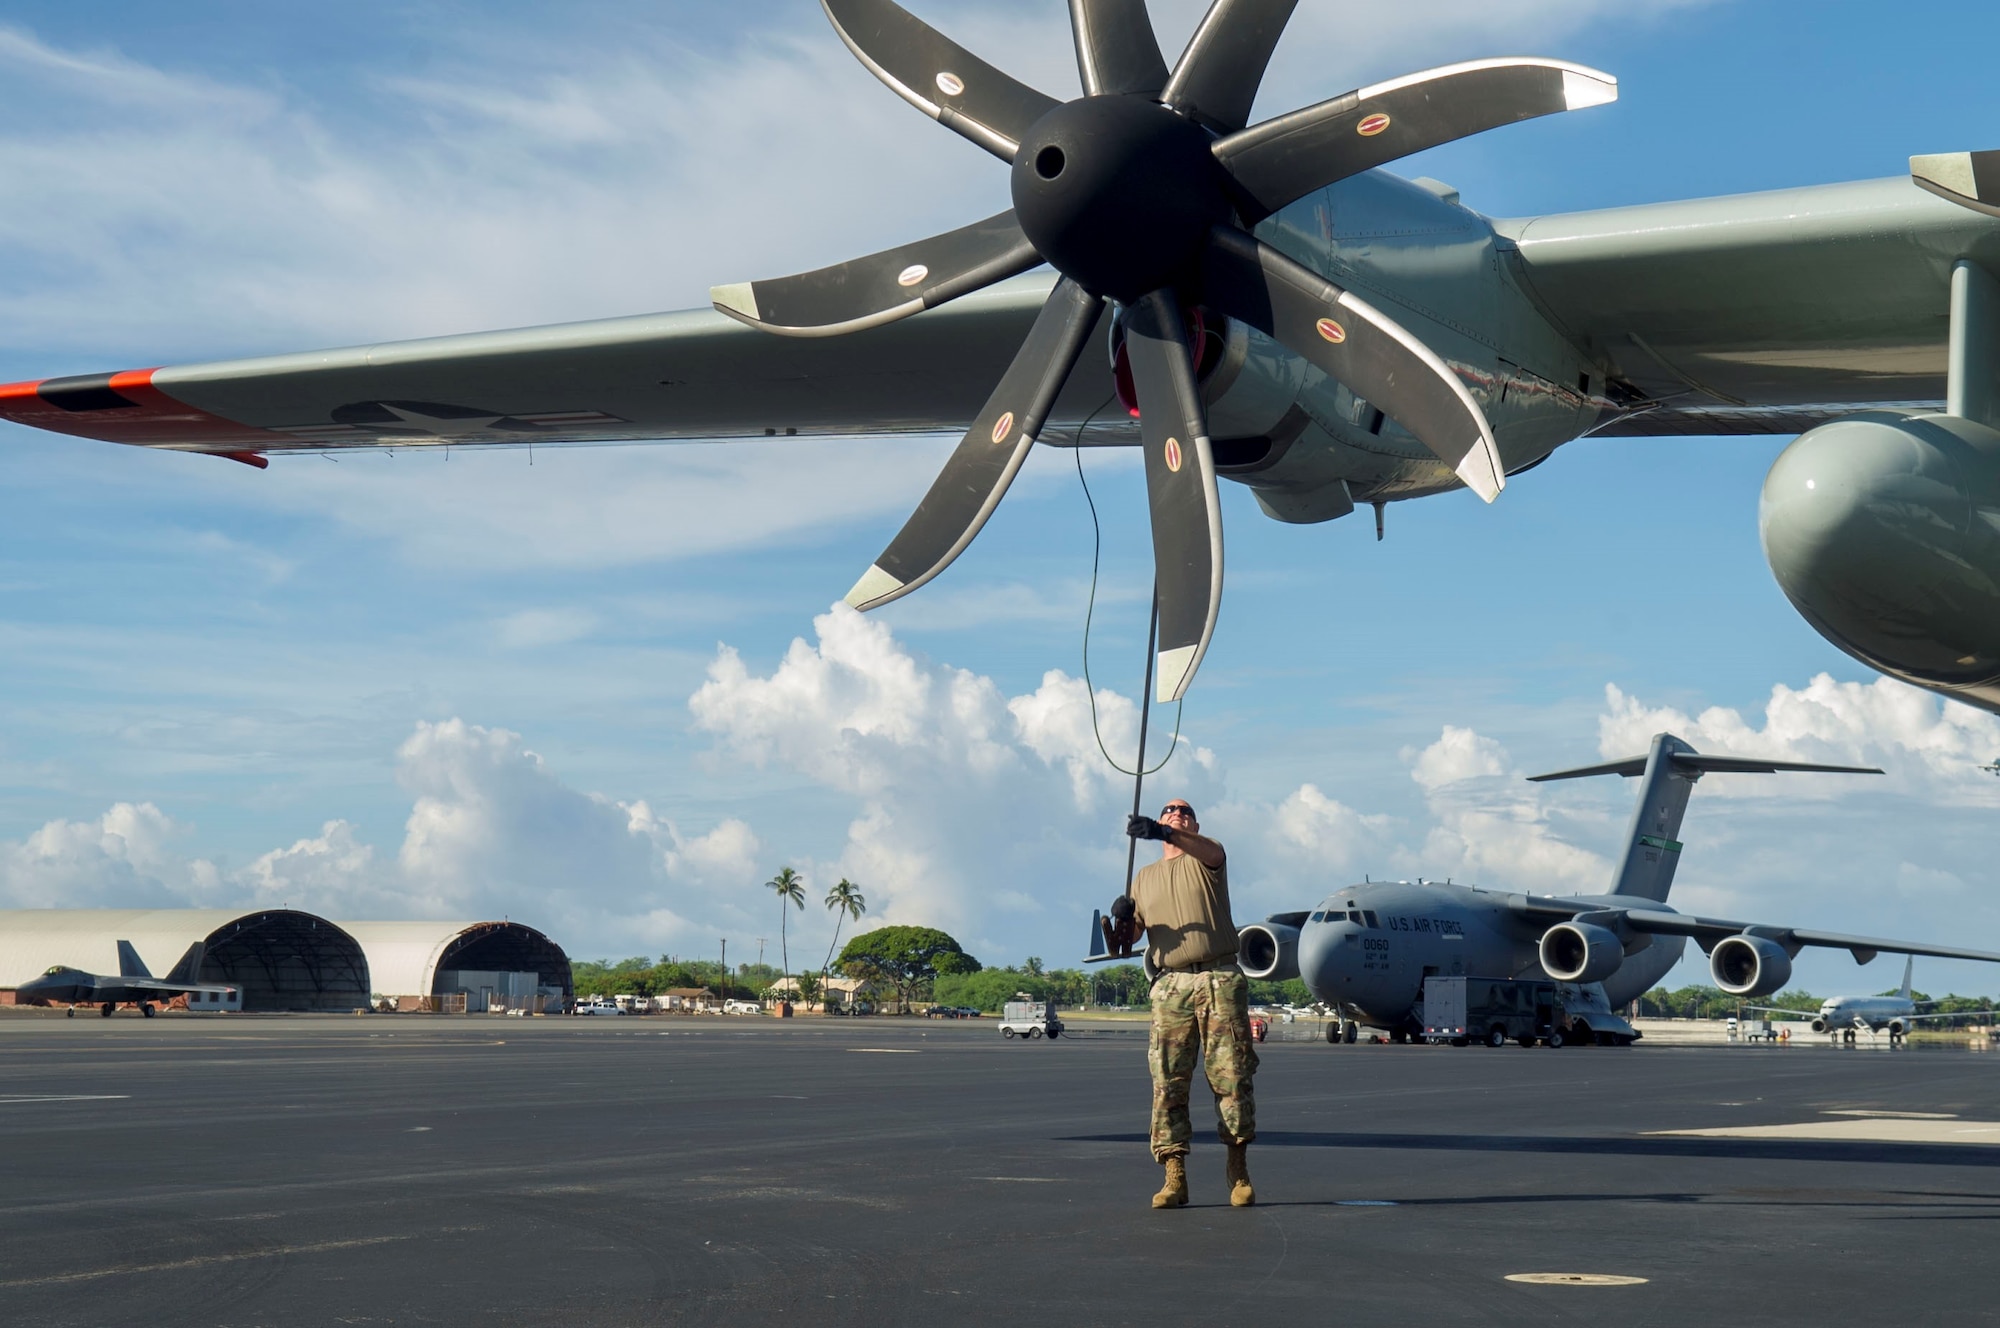 An Airman assigned to the 109th Airlift Wing, Stratton Air National Guard Base, New York, performs pre-flight inspections on the flightline at Joint Base Pearl Harbor-Hickam, Hawaii, Oct. 31, 2019. All the LC-130 aircraft need to be in theater in a timely fashion to support the National Science Foundation’s mission. Pacific Air Forces operates on a 24-hour basis to provide complete joint operational and logistic support for the National Science Foundation-managed U.S. Antarctic Program (USAP). Operation DEEP FREEZE is the U.S. military’s contribution to the civilian-managed USAP. (U.S. Air Force photo by Staff Sgt. Mikaley Kline)